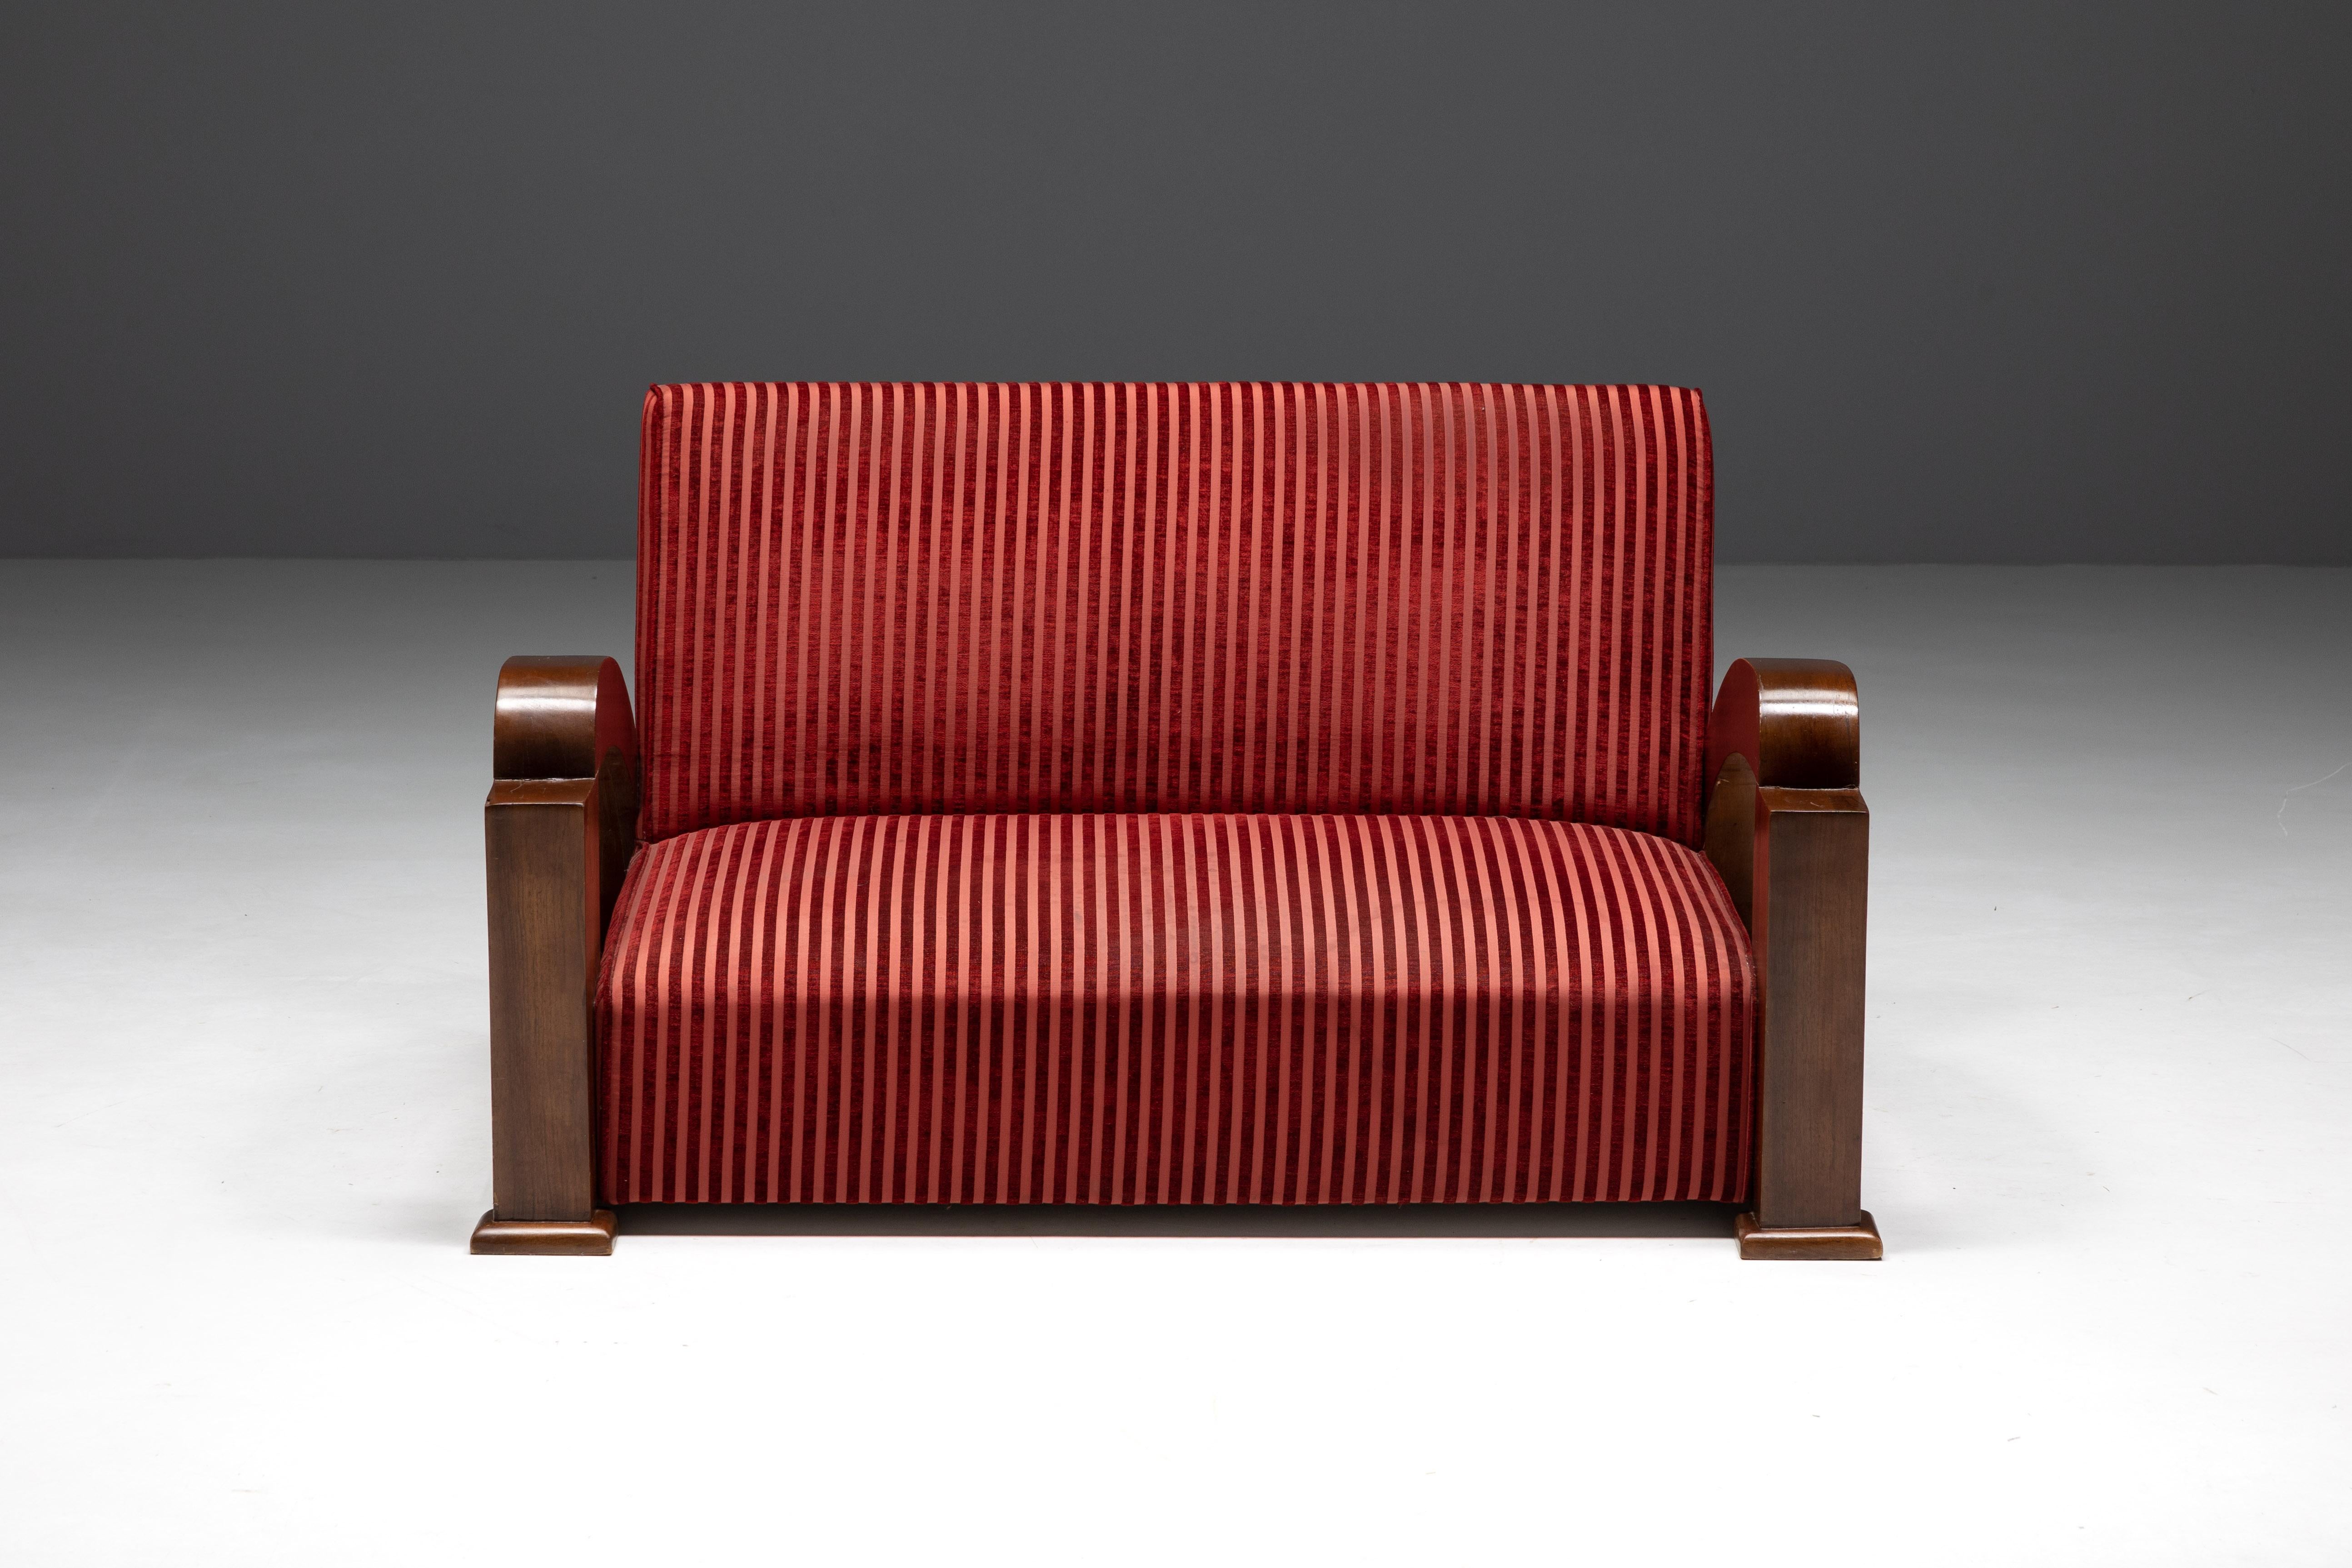 Art Deco Sofa in Red Striped Velvet and with Swoosh Armrests, France, 1940s For Sale 5